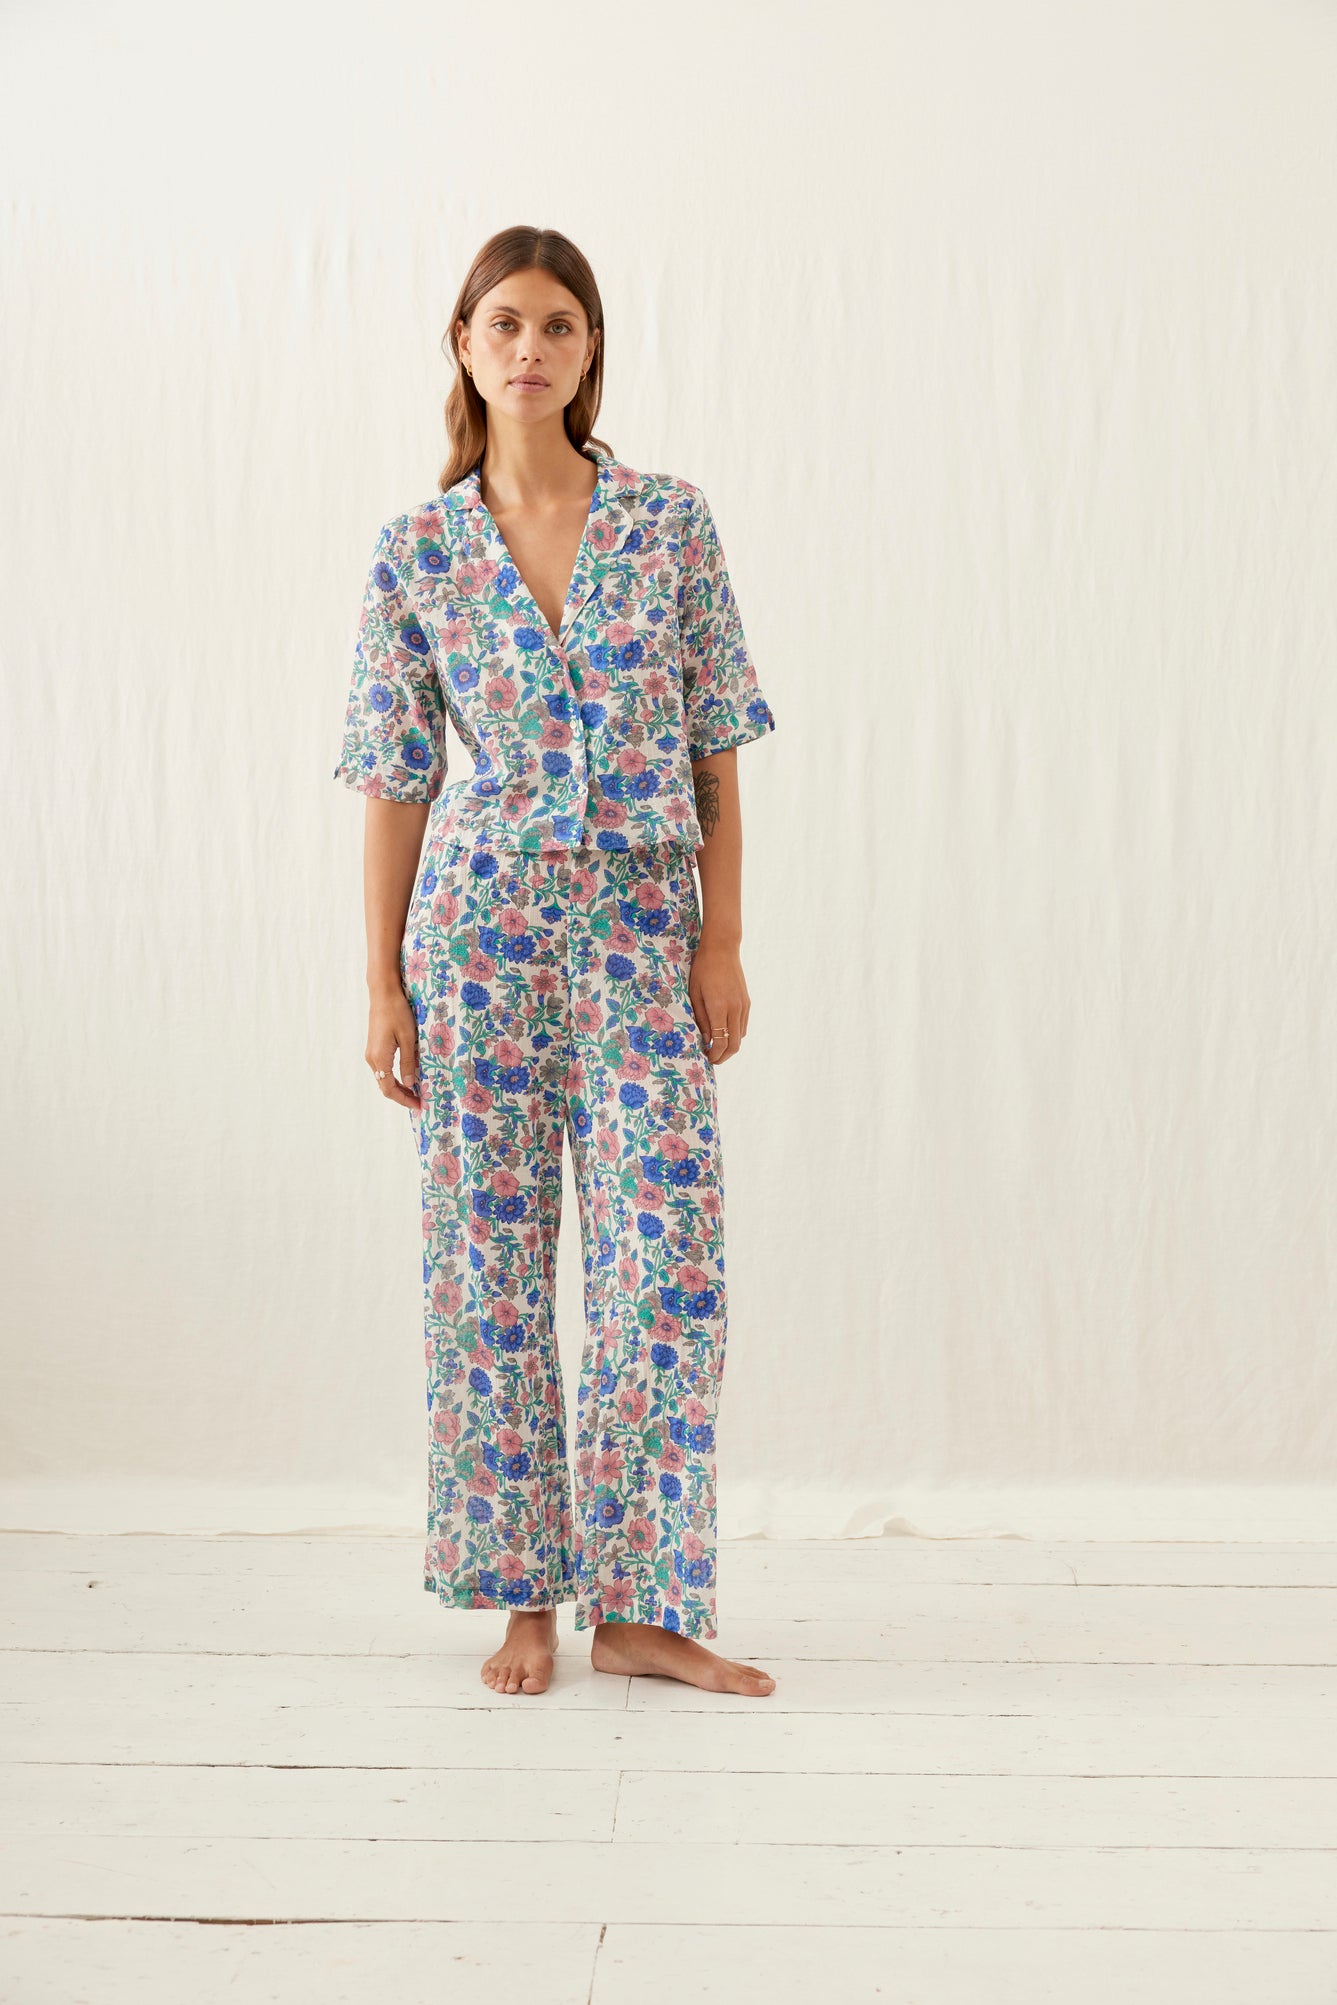 These organic cotton women's pyjamas or loungewear in Blue summer Meadow print will become the favourite thing to wear and perfect summer pyjamas. These organic cotton women's pyjamas set are made by Louise Misha. This organic cotton pyjama set is also the perfect gift for women and moms - Mother's Day is coming up!